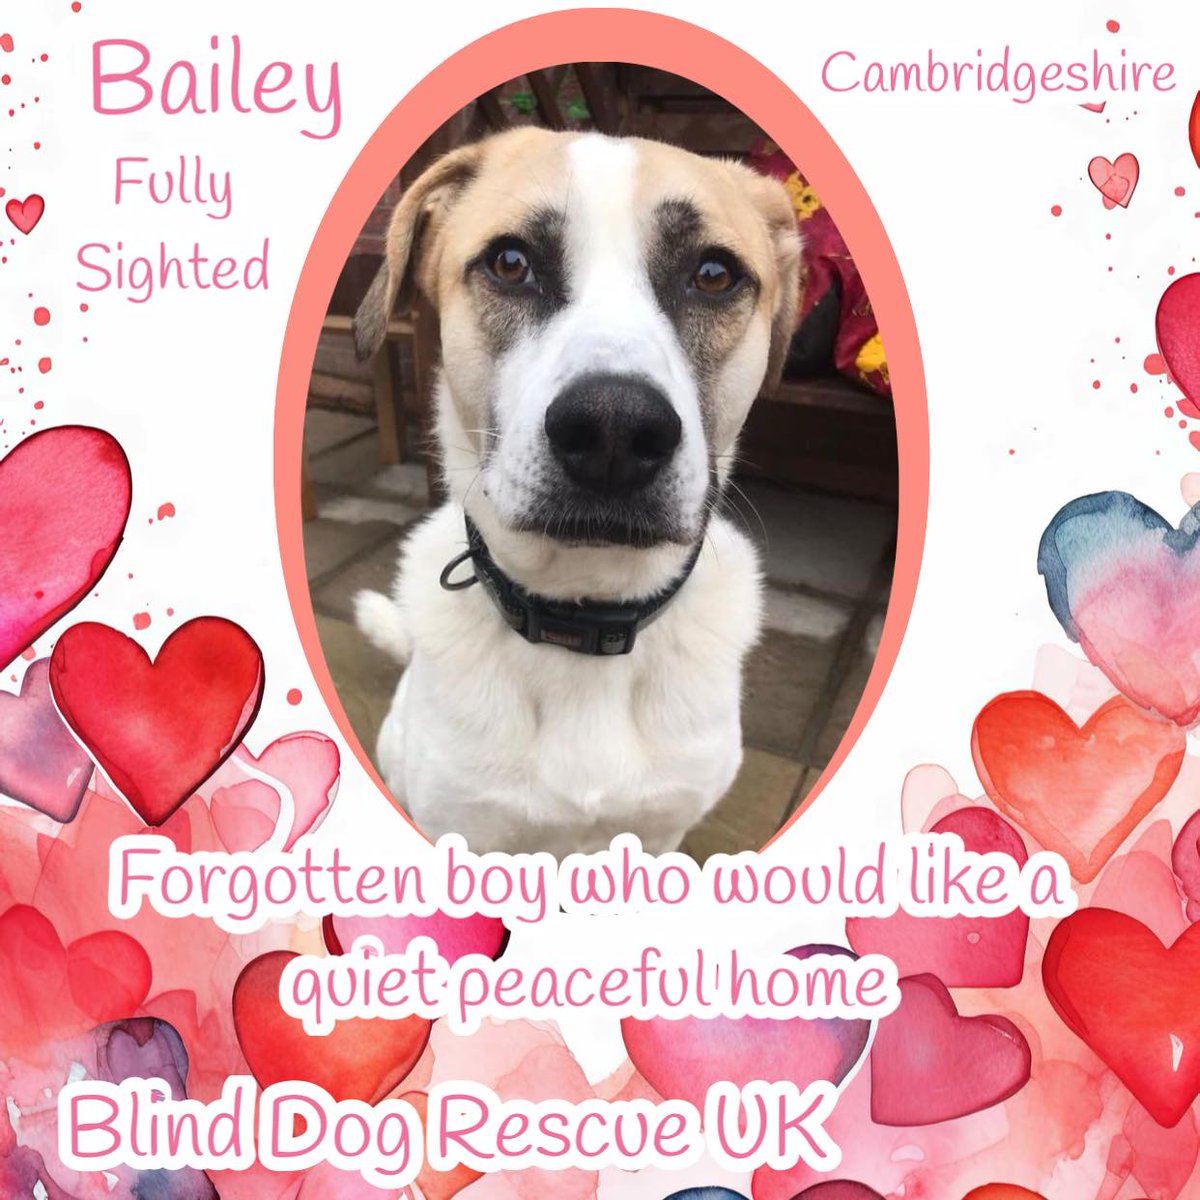 #forgottensoulshour Please RT for dear BAILEY, he is one of BDRUK’s forgotten dogs. He is always overlooked & has spent over 2 years in kennels waiting for a home. 😢 You never know if that one RT will change his world. 🙏Bailey needs a very special home, quiet & peaceful, with